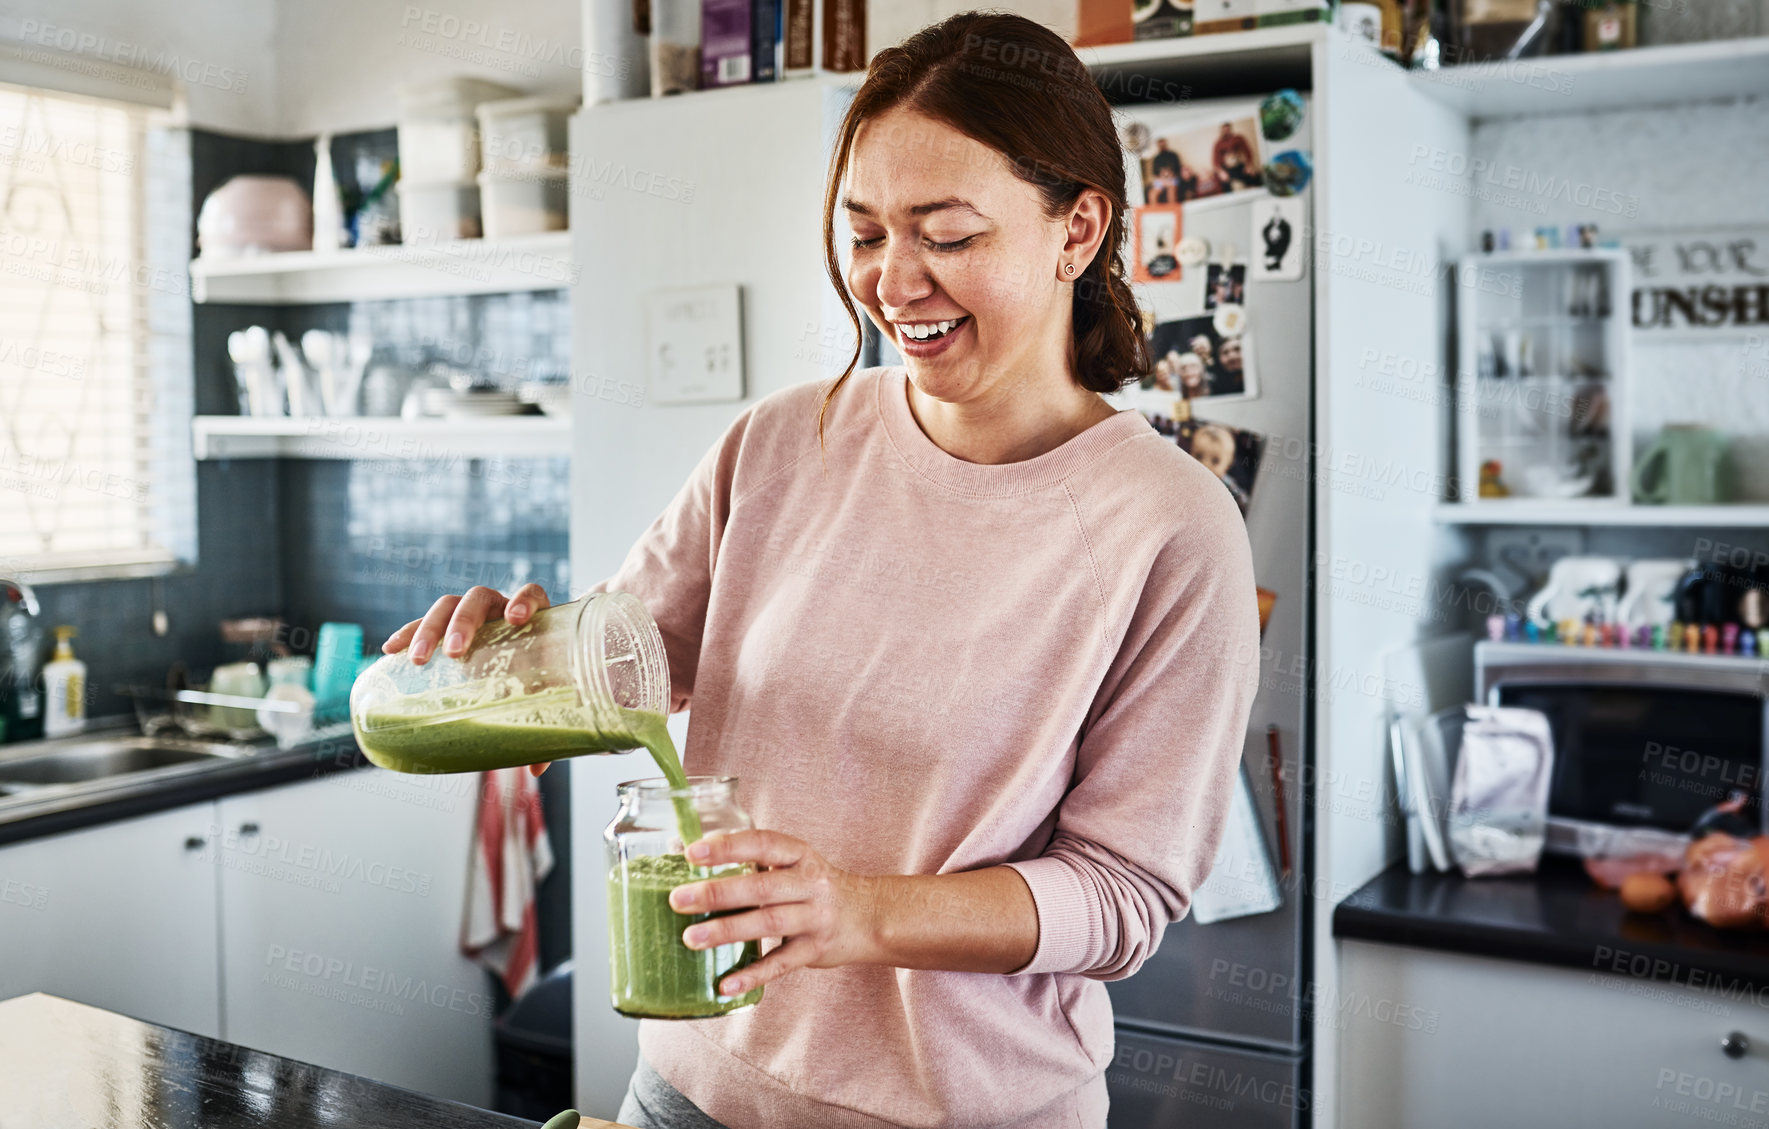 Buy stock photo Cropped shot of a young woman making a smoothie in the kitchen at home